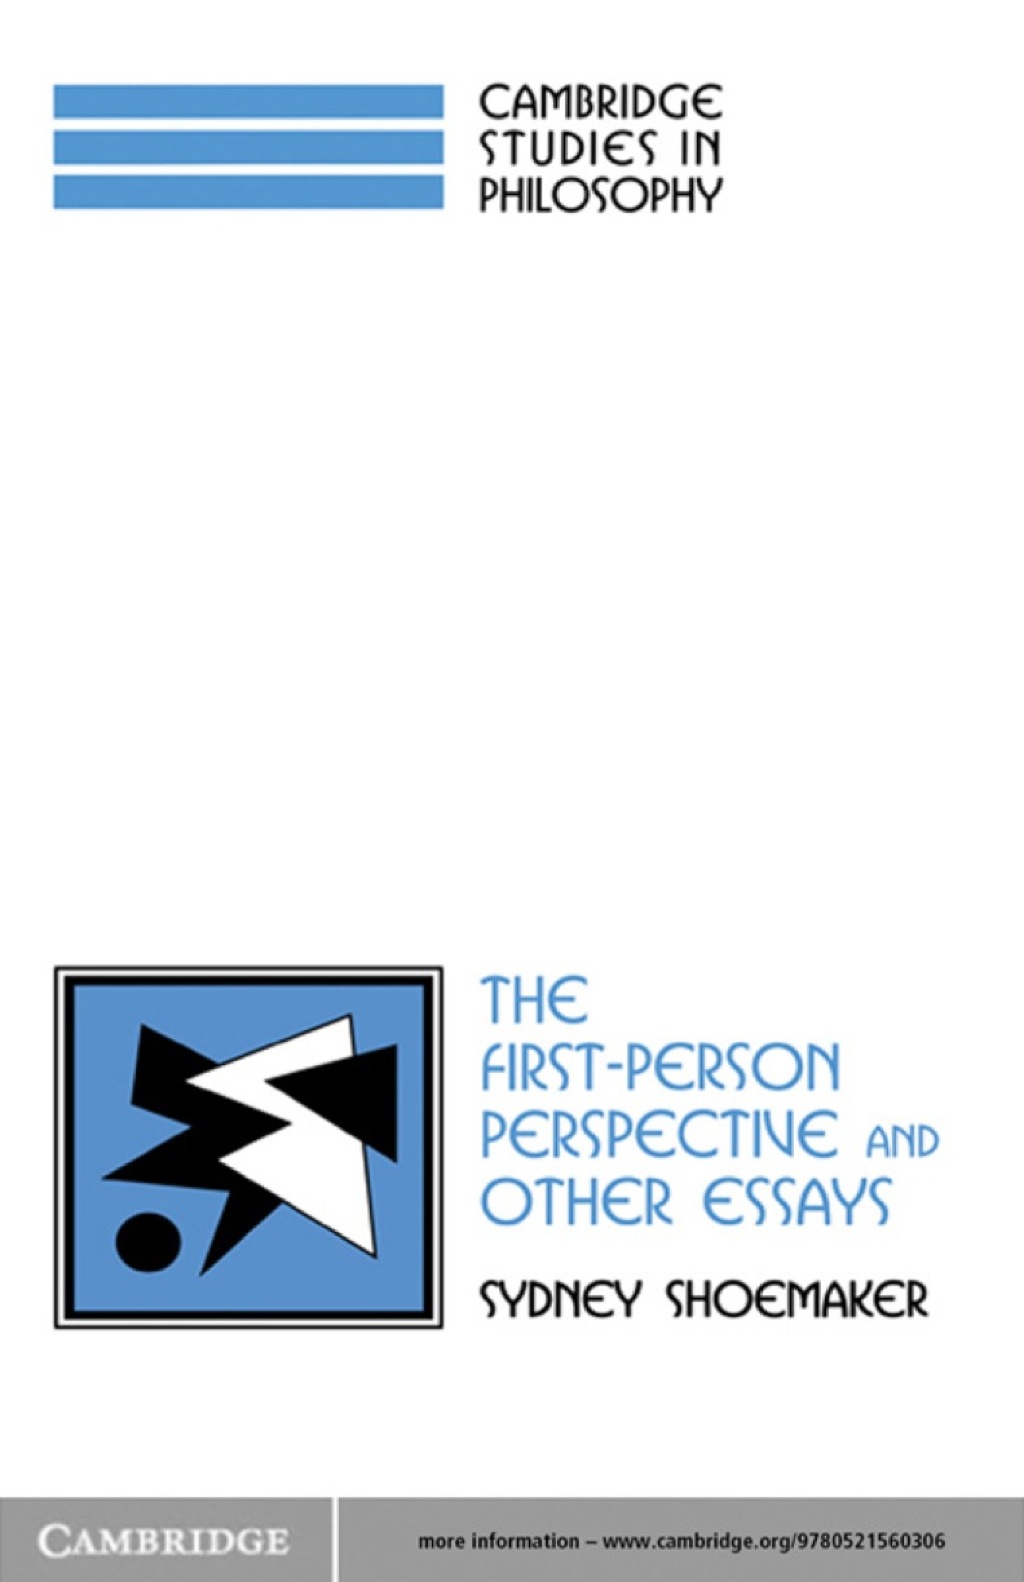 The First-Person Perspective and Other Essays (eBook) - Sydney Shoemaker